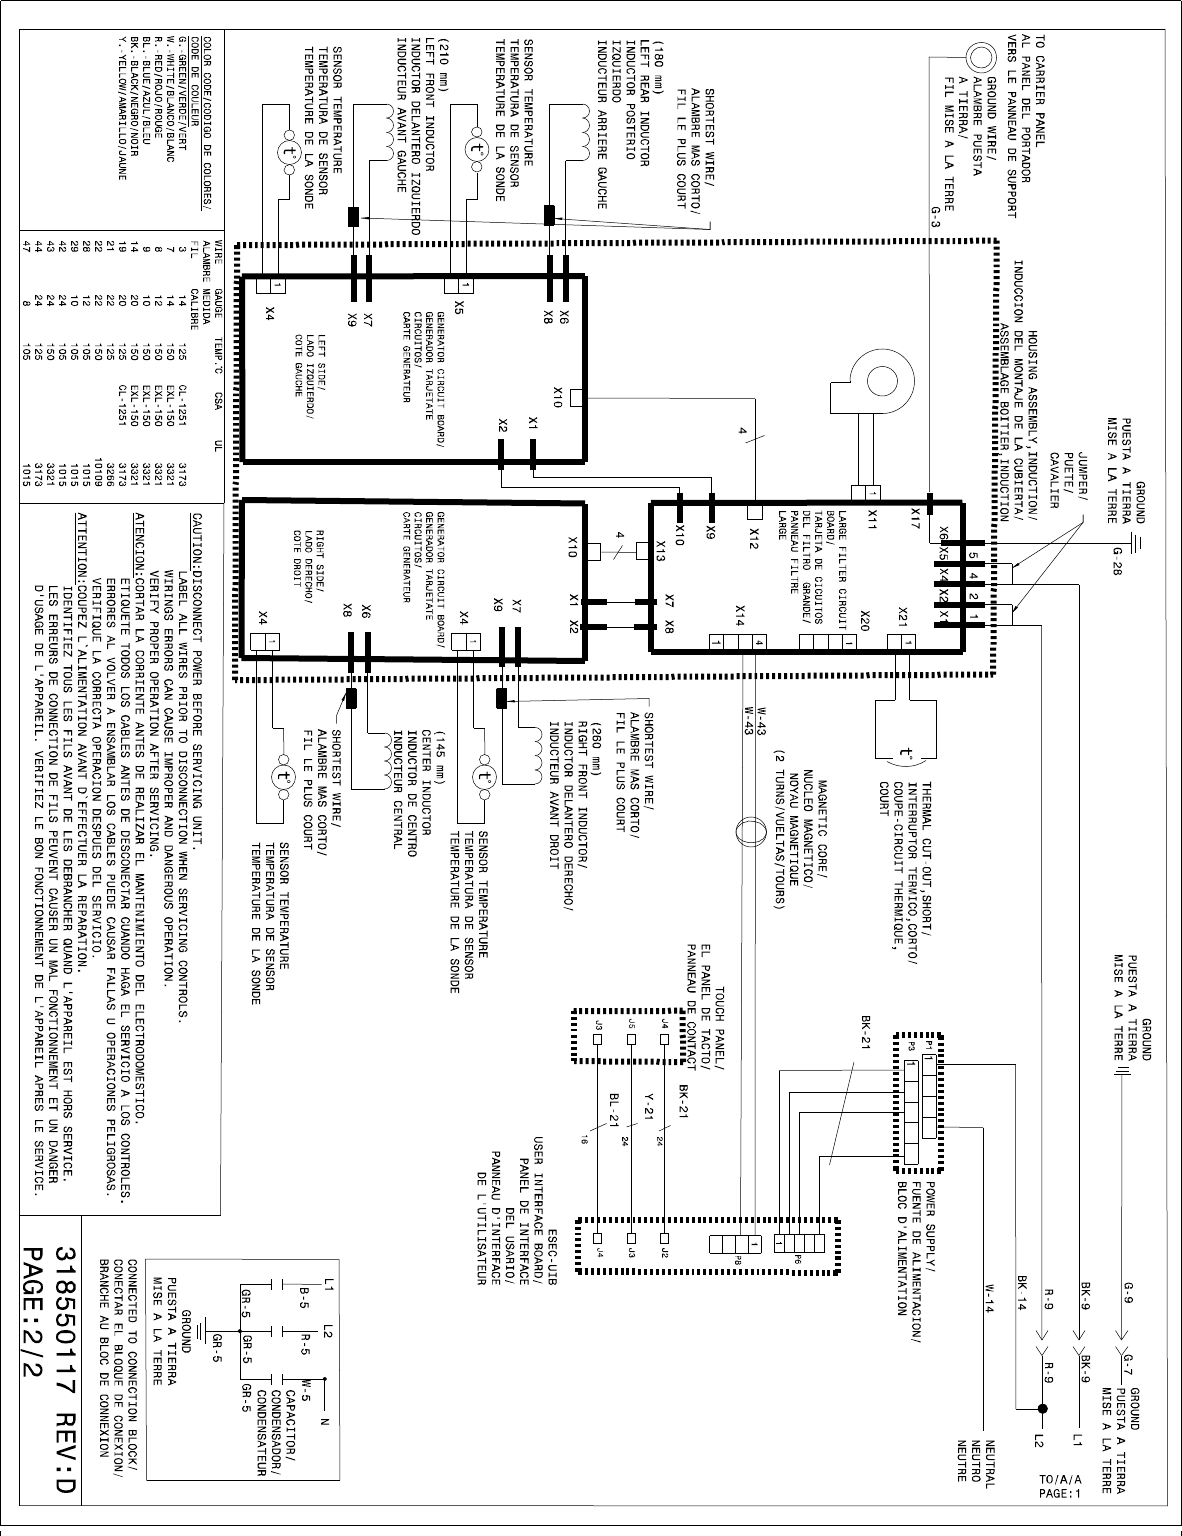 Page 2 of 2 - Electrolux Electrolux-30-Induction-Built-In-Range-With-Wave-Touch-Controls-Ew30Is65Js-Wiring-Diagram- LAS_CATDRW-012989.CATDrawing  Electrolux-30-induction-built-in-range-with-wave-touch-controls-ew30is65js-wiring-diagram